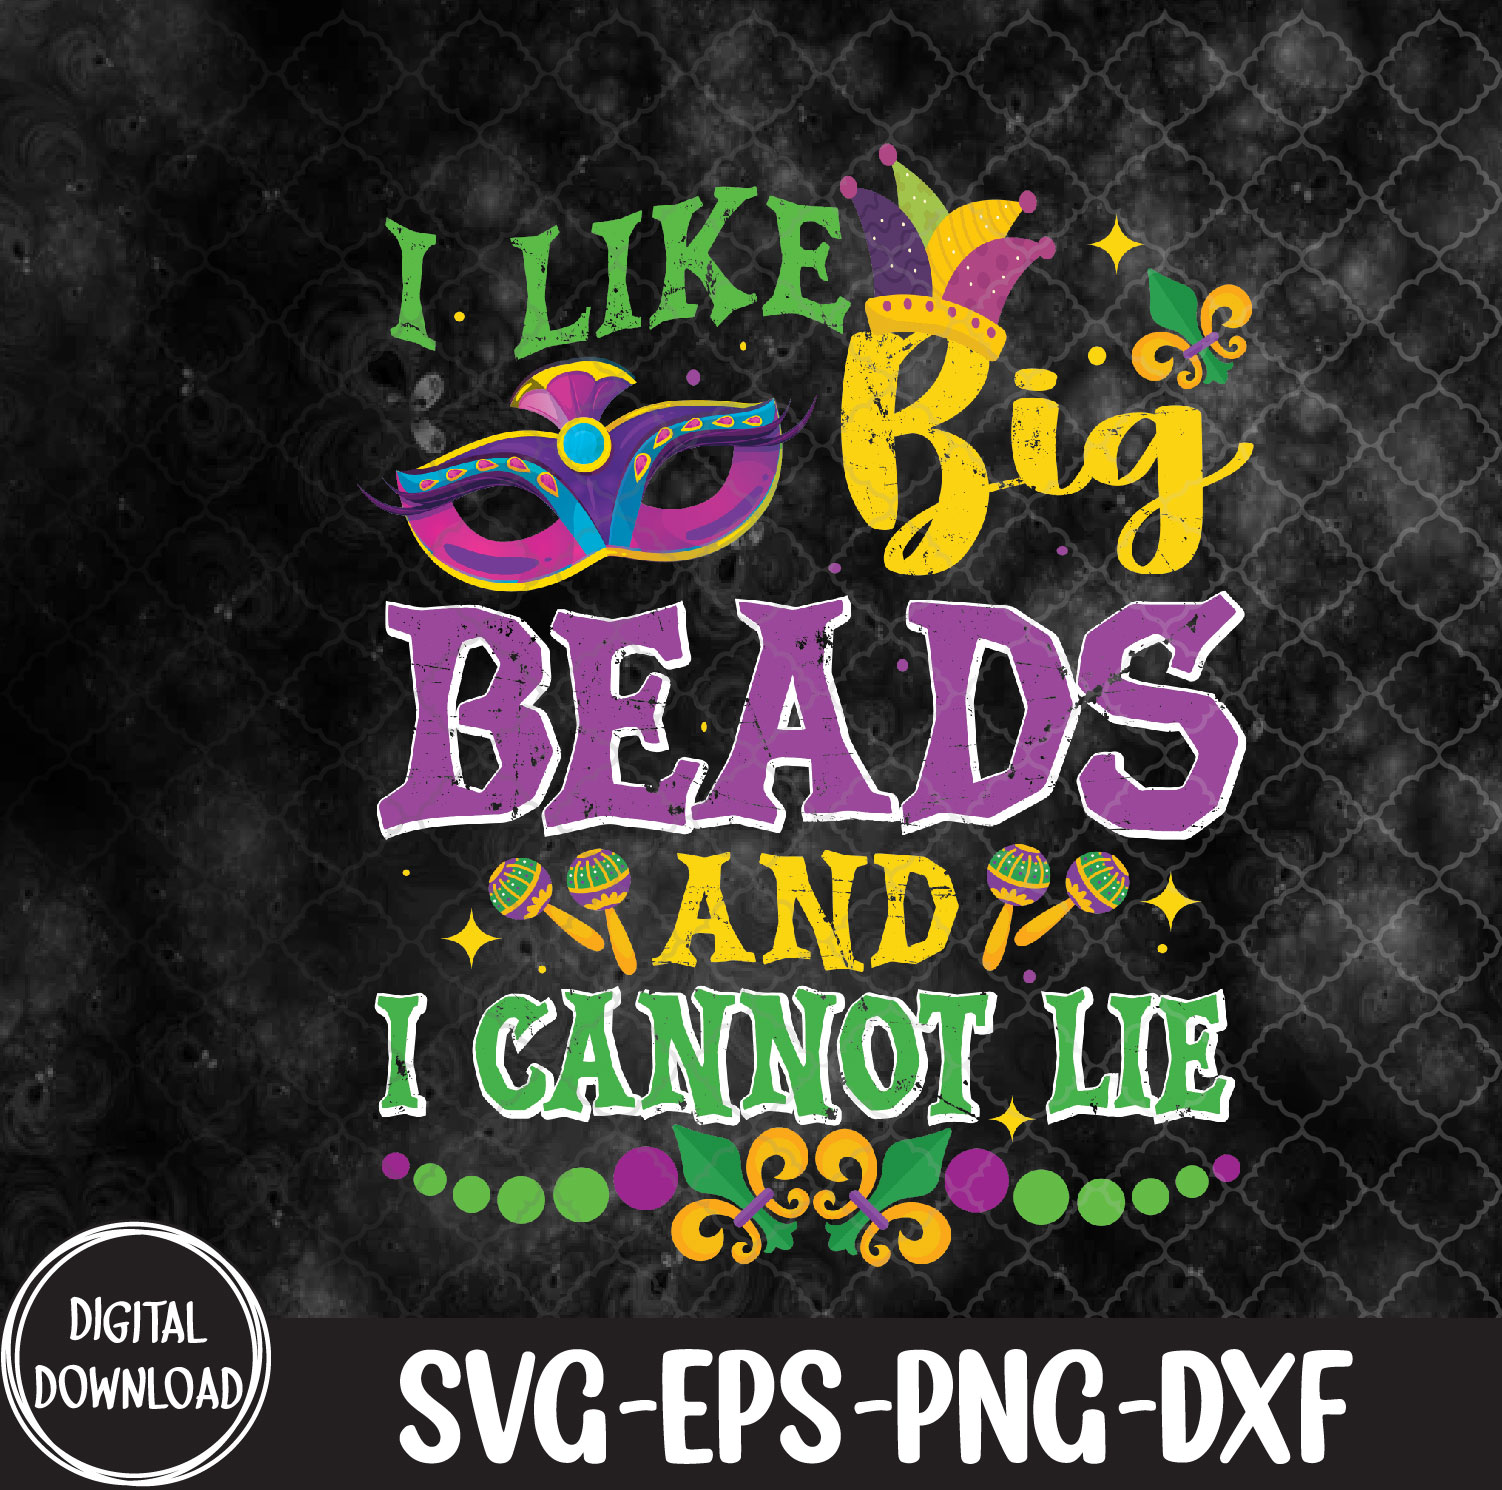 WTMNEW9file 09 27 I Like Big Beads And I Cannot Lie, Mardi Gras Carnival svg, Svg, Eps, Png, Dxf